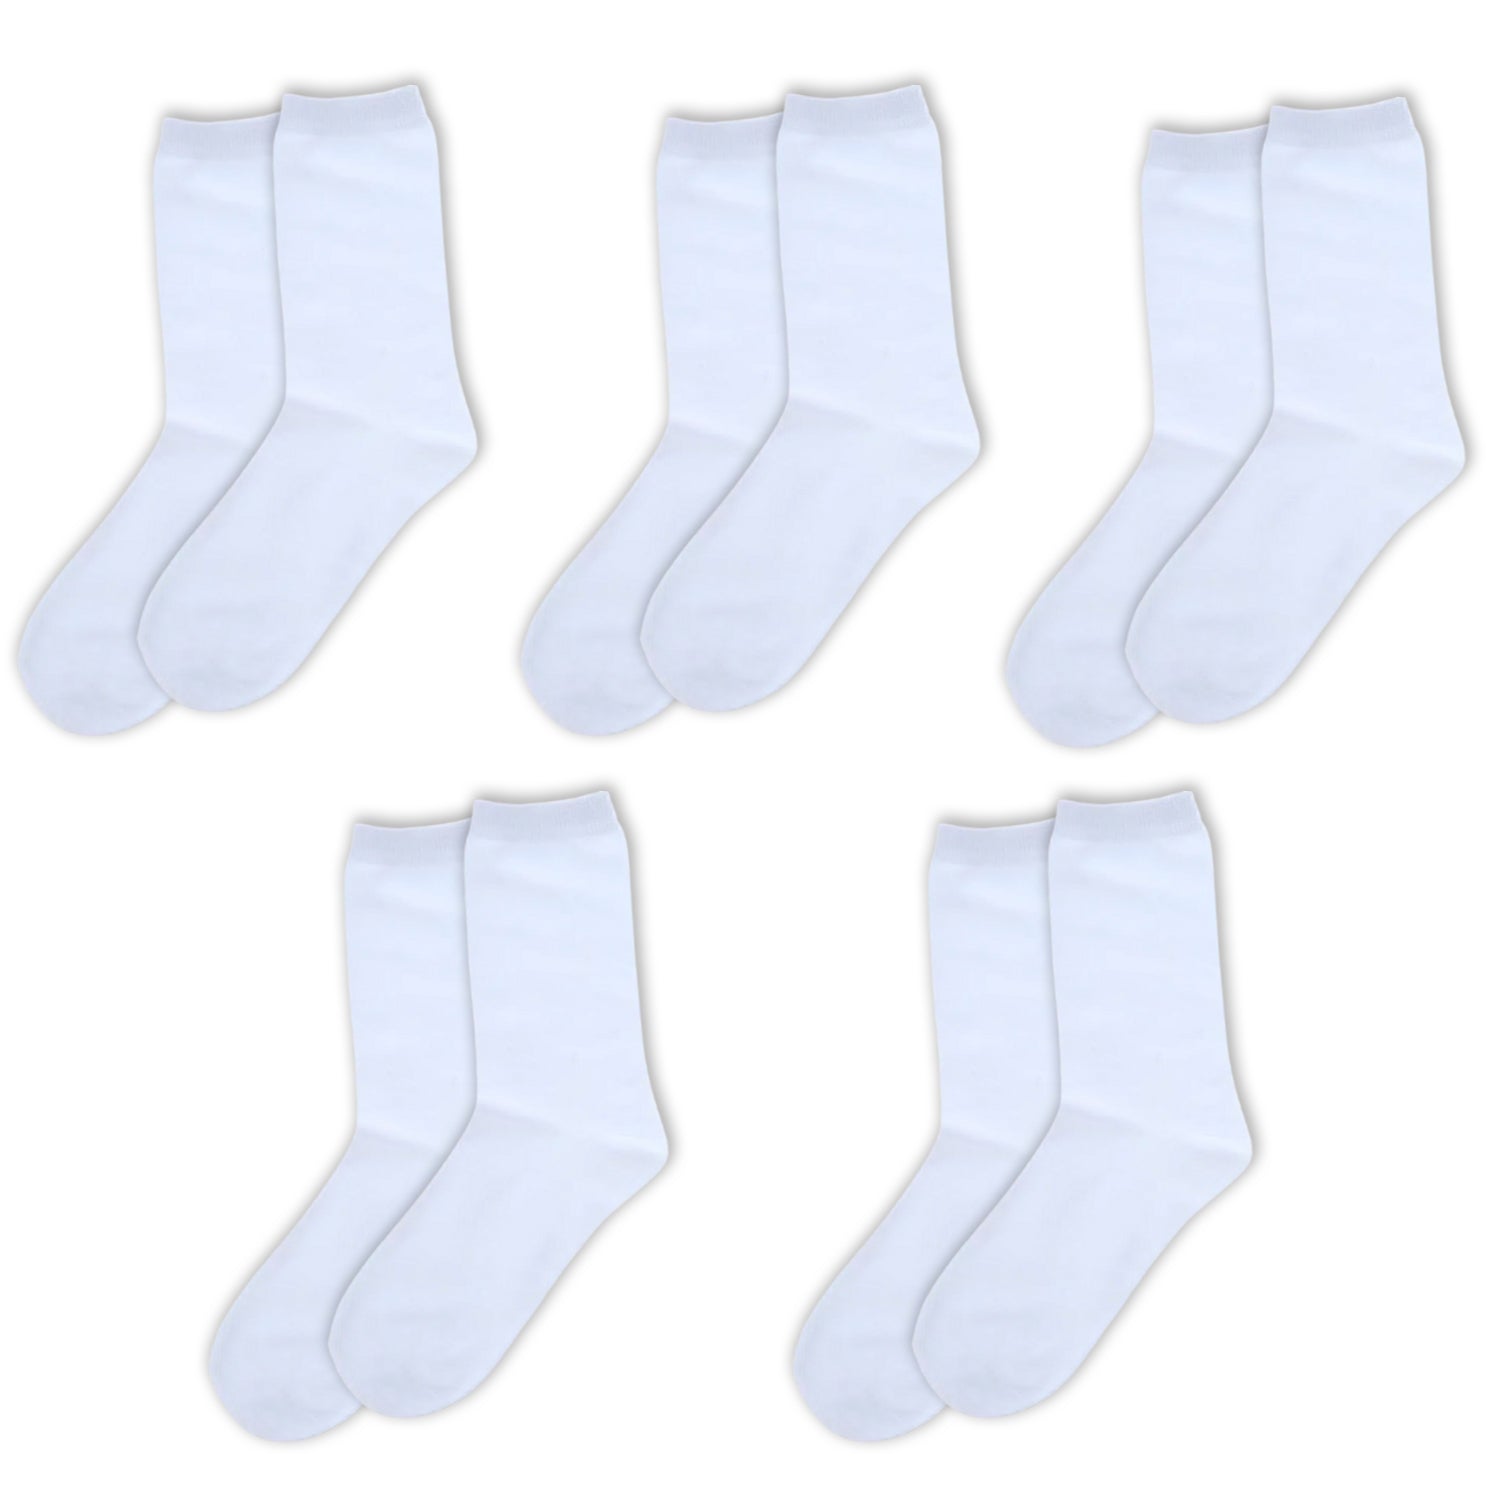 High-quality white kids’ socks for everyday wear and comfort